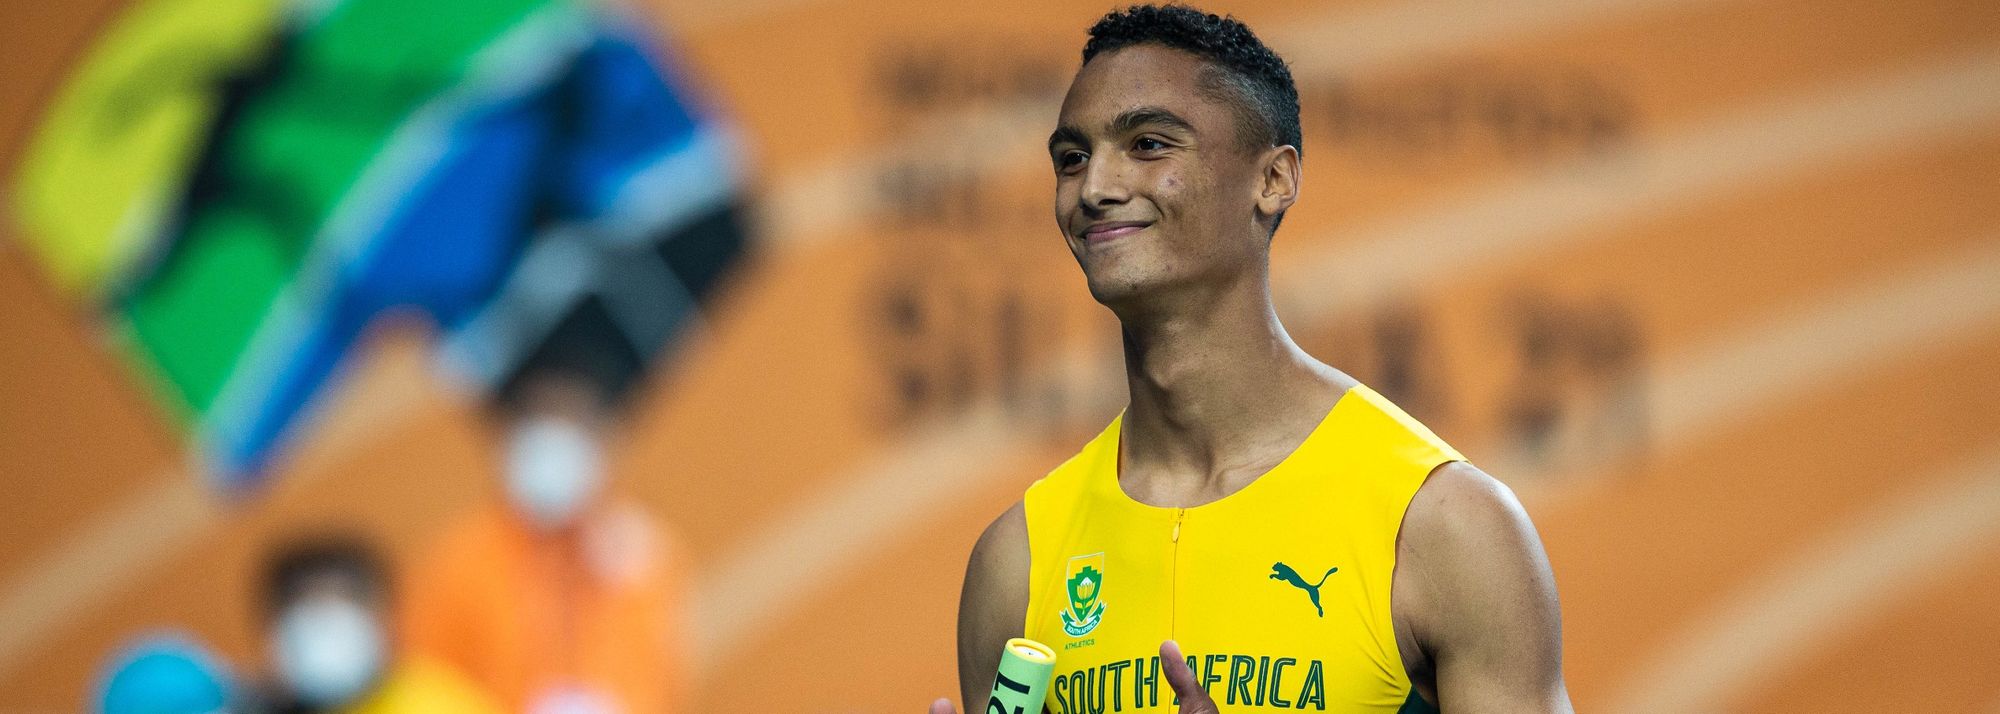 With 100 days to go until the World Athletics U20 Championships Nairobi 21, Lythe Pillay is one of his country’s brightest prospects for gold.